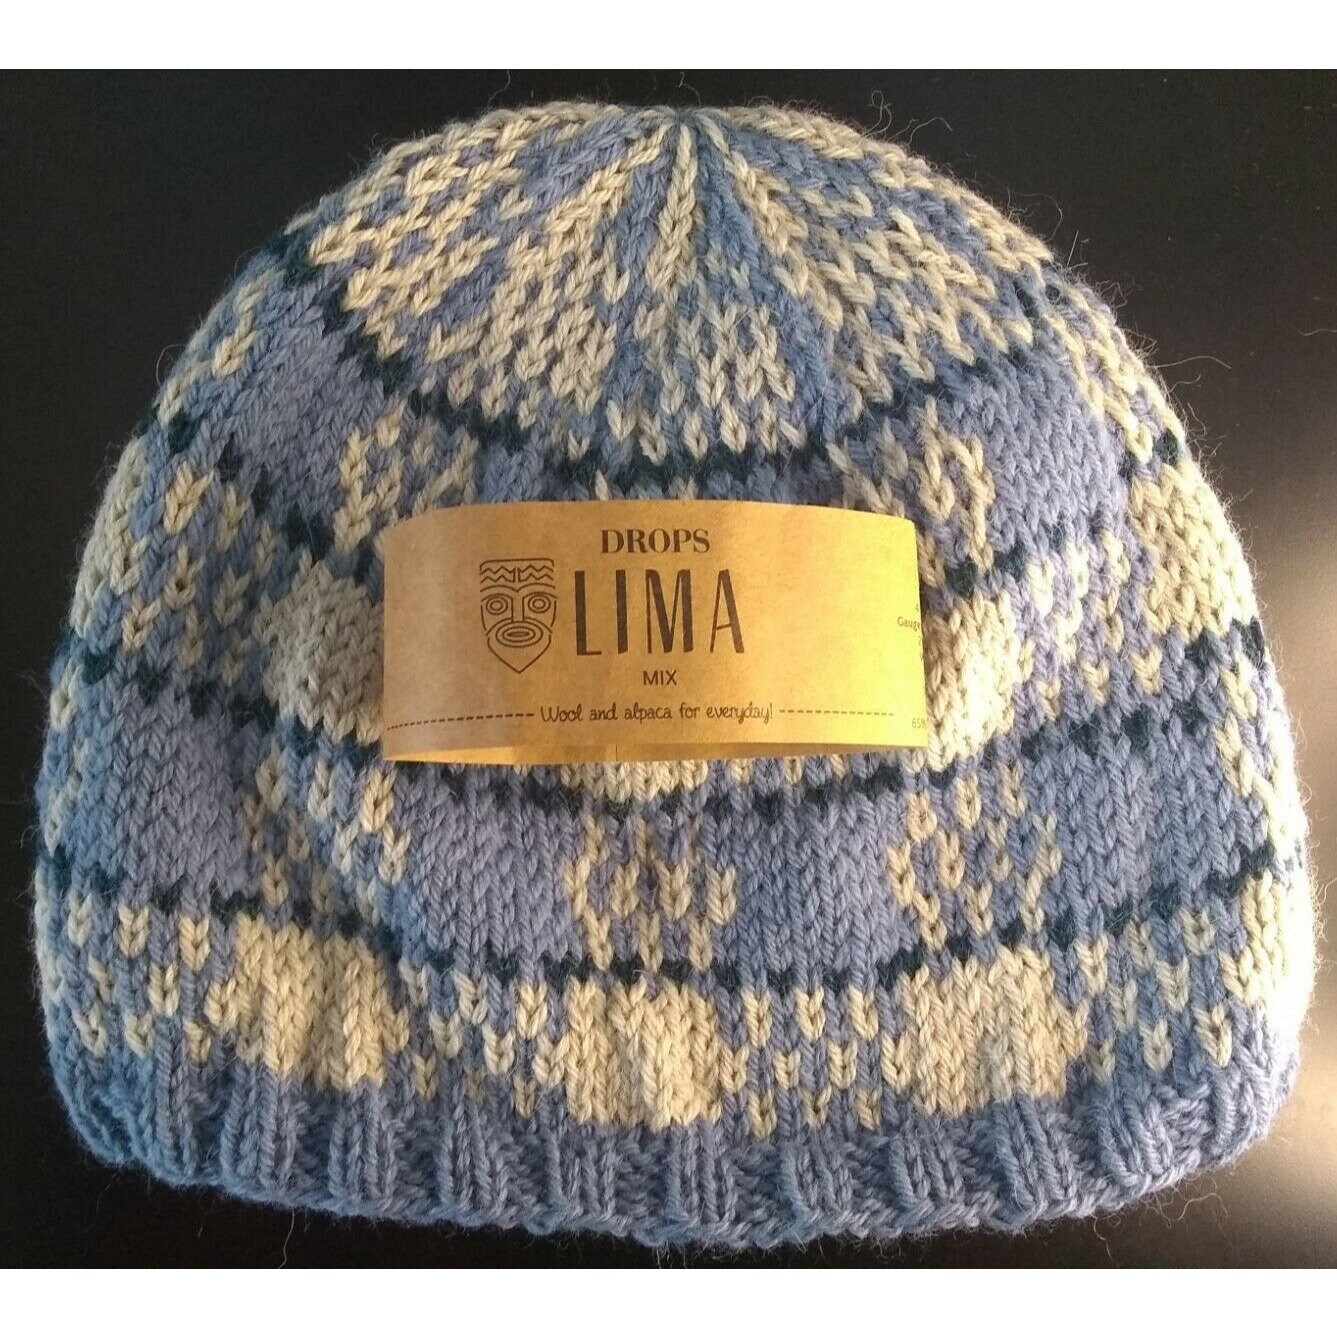 DROPS Lima - The perfect every day yarn! 